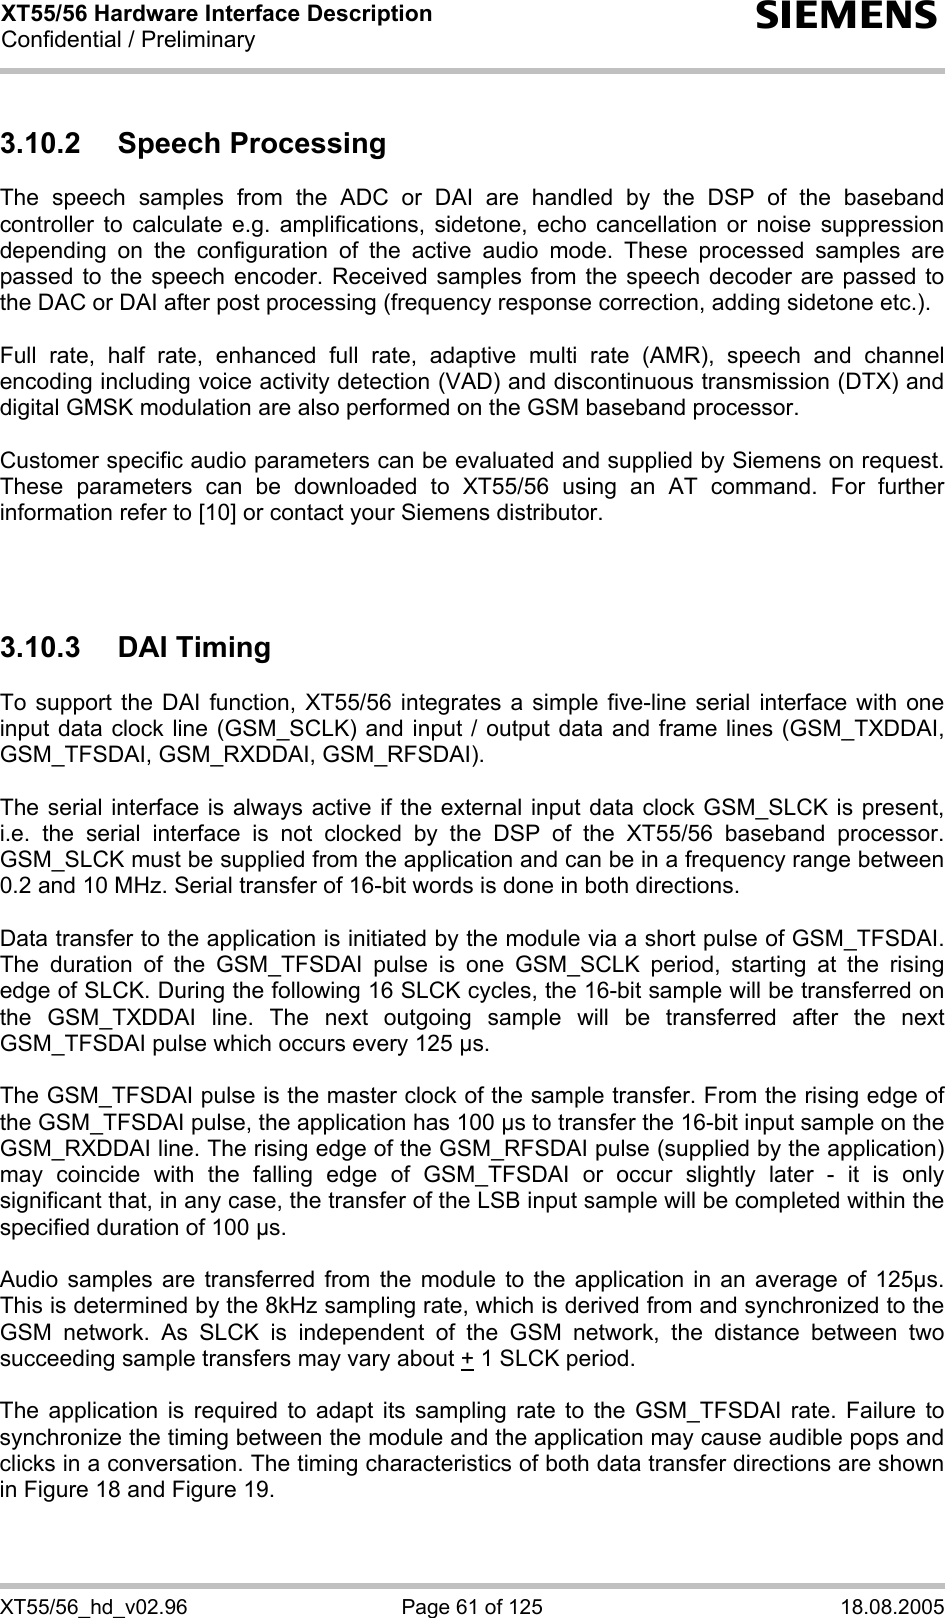 XT55/56 Hardware Interface Description Confidential / Preliminary s XT55/56_hd_v02.96  Page 61 of 125  18.08.2005 3.10.2 Speech Processing The speech samples from the ADC or DAI are handled by the DSP of the baseband controller to calculate e.g. amplifications, sidetone, echo cancellation or noise suppression depending on the configuration of the active audio mode. These processed samples are passed to the speech encoder. Received samples from the speech decoder are passed to the DAC or DAI after post processing (frequency response correction, adding sidetone etc.).  Full rate, half rate, enhanced full rate, adaptive multi rate (AMR), speech and channel encoding including voice activity detection (VAD) and discontinuous transmission (DTX) and digital GMSK modulation are also performed on the GSM baseband processor.  Customer specific audio parameters can be evaluated and supplied by Siemens on request. These parameters can be downloaded to XT55/56 using an AT command. For further information refer to [10] or contact your Siemens distributor.    3.10.3 DAI Timing To support the DAI function, XT55/56 integrates a simple five-line serial interface with one input data clock line (GSM_SCLK) and input / output data and frame lines (GSM_TXDDAI, GSM_TFSDAI, GSM_RXDDAI, GSM_RFSDAI).   The serial interface is always active if the external input data clock GSM_SLCK is present, i.e. the serial interface is not clocked by the DSP of the XT55/56 baseband processor. GSM_SLCK must be supplied from the application and can be in a frequency range between 0.2 and 10 MHz. Serial transfer of 16-bit words is done in both directions.   Data transfer to the application is initiated by the module via a short pulse of GSM_TFSDAI. The duration of the GSM_TFSDAI pulse is one GSM_SCLK period, starting at the rising edge of SLCK. During the following 16 SLCK cycles, the 16-bit sample will be transferred on the GSM_TXDDAI line. The next outgoing sample will be transferred after the next GSM_TFSDAI pulse which occurs every 125 µs.   The GSM_TFSDAI pulse is the master clock of the sample transfer. From the rising edge of the GSM_TFSDAI pulse, the application has 100 µs to transfer the 16-bit input sample on the GSM_RXDDAI line. The rising edge of the GSM_RFSDAI pulse (supplied by the application) may coincide with the falling edge of GSM_TFSDAI or occur slightly later - it is only significant that, in any case, the transfer of the LSB input sample will be completed within the specified duration of 100 µs.   Audio samples are transferred from the module to the application in an average of 125µs. This is determined by the 8kHz sampling rate, which is derived from and synchronized to the GSM network. As SLCK is independent of the GSM network, the distance between two succeeding sample transfers may vary about + 1 SLCK period.  The application is required to adapt its sampling rate to the GSM_TFSDAI rate. Failure to synchronize the timing between the module and the application may cause audible pops and clicks in a conversation. The timing characteristics of both data transfer directions are shown in Figure 18 and Figure 19.  